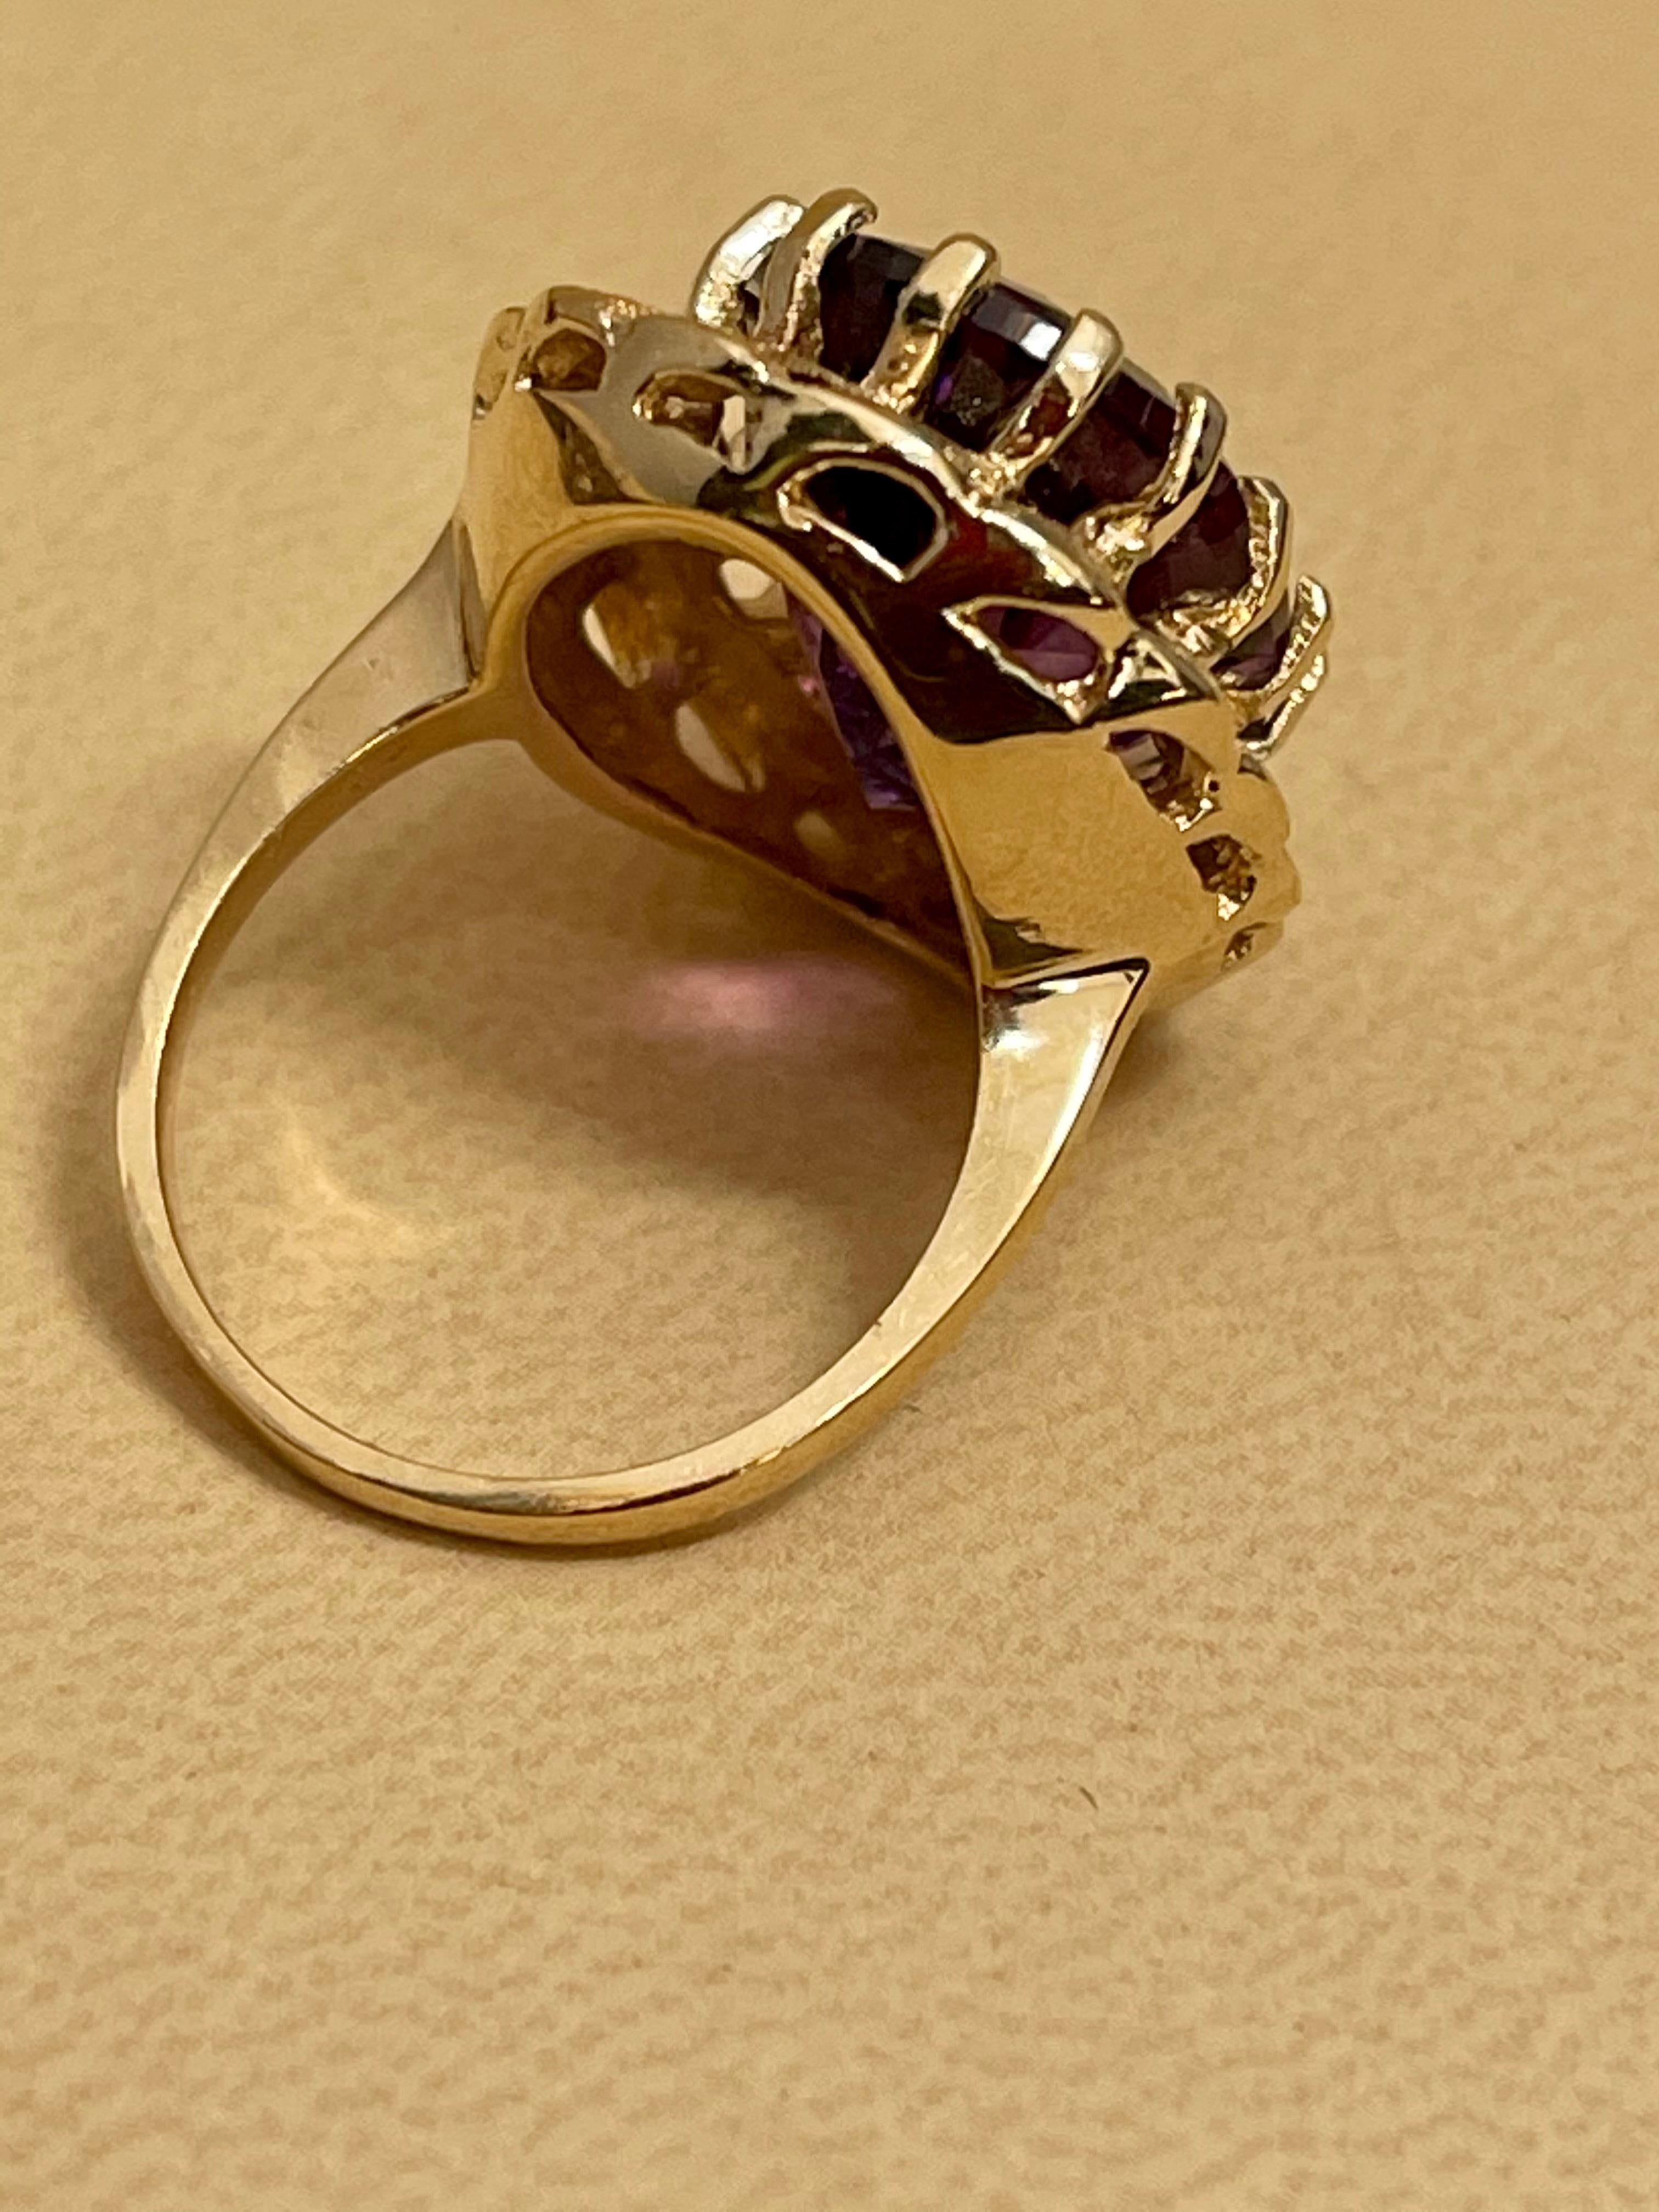 10 Carat Checker Board Amethyst Cocktail Ring in 14 Karat Yellow Gold For Sale 3